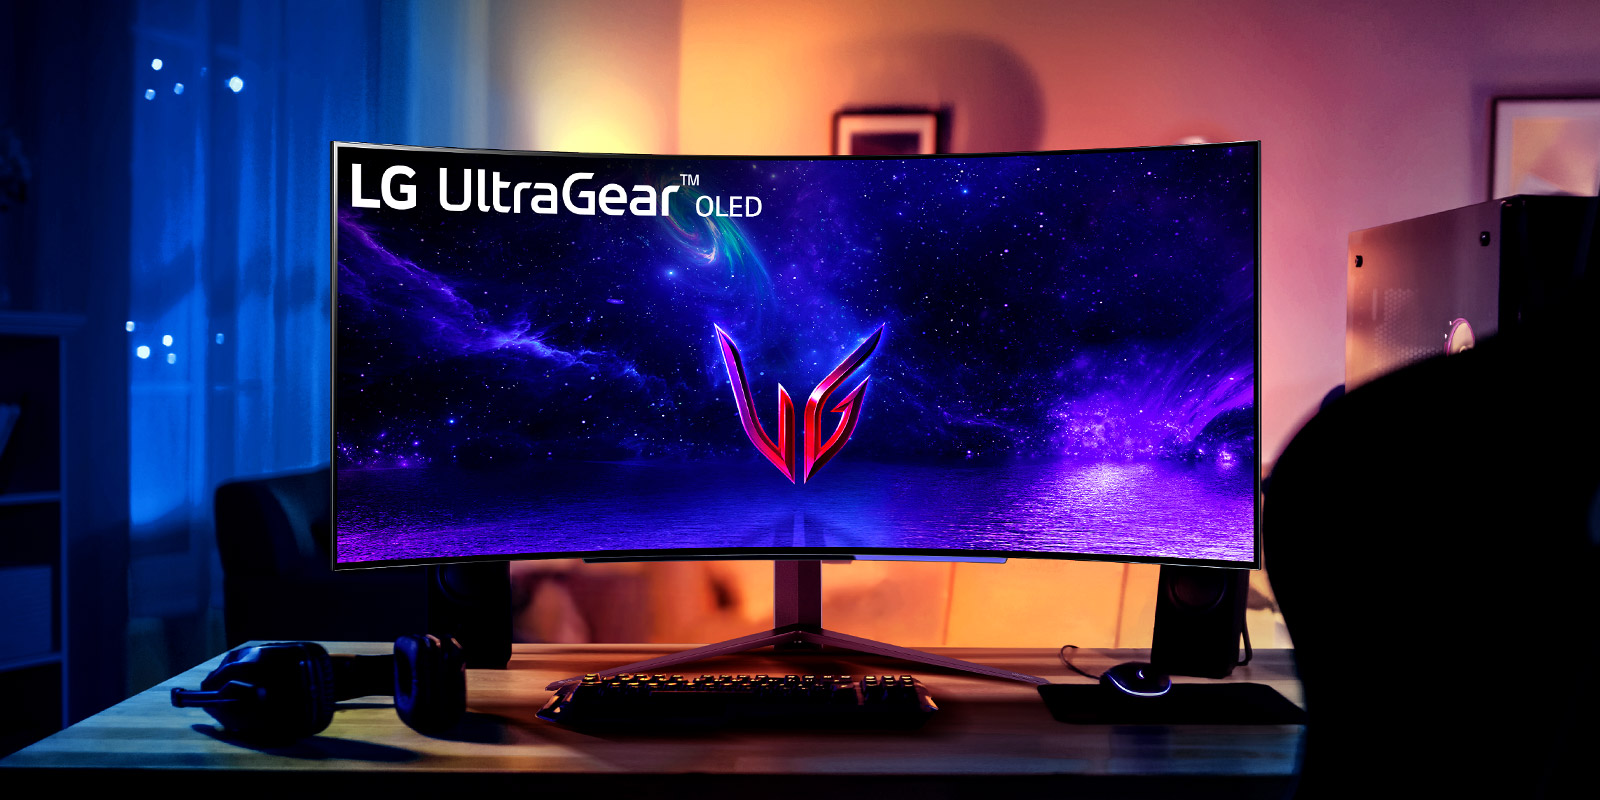 Caution: Before you buy an ultrawide or superwide monitor for gaming